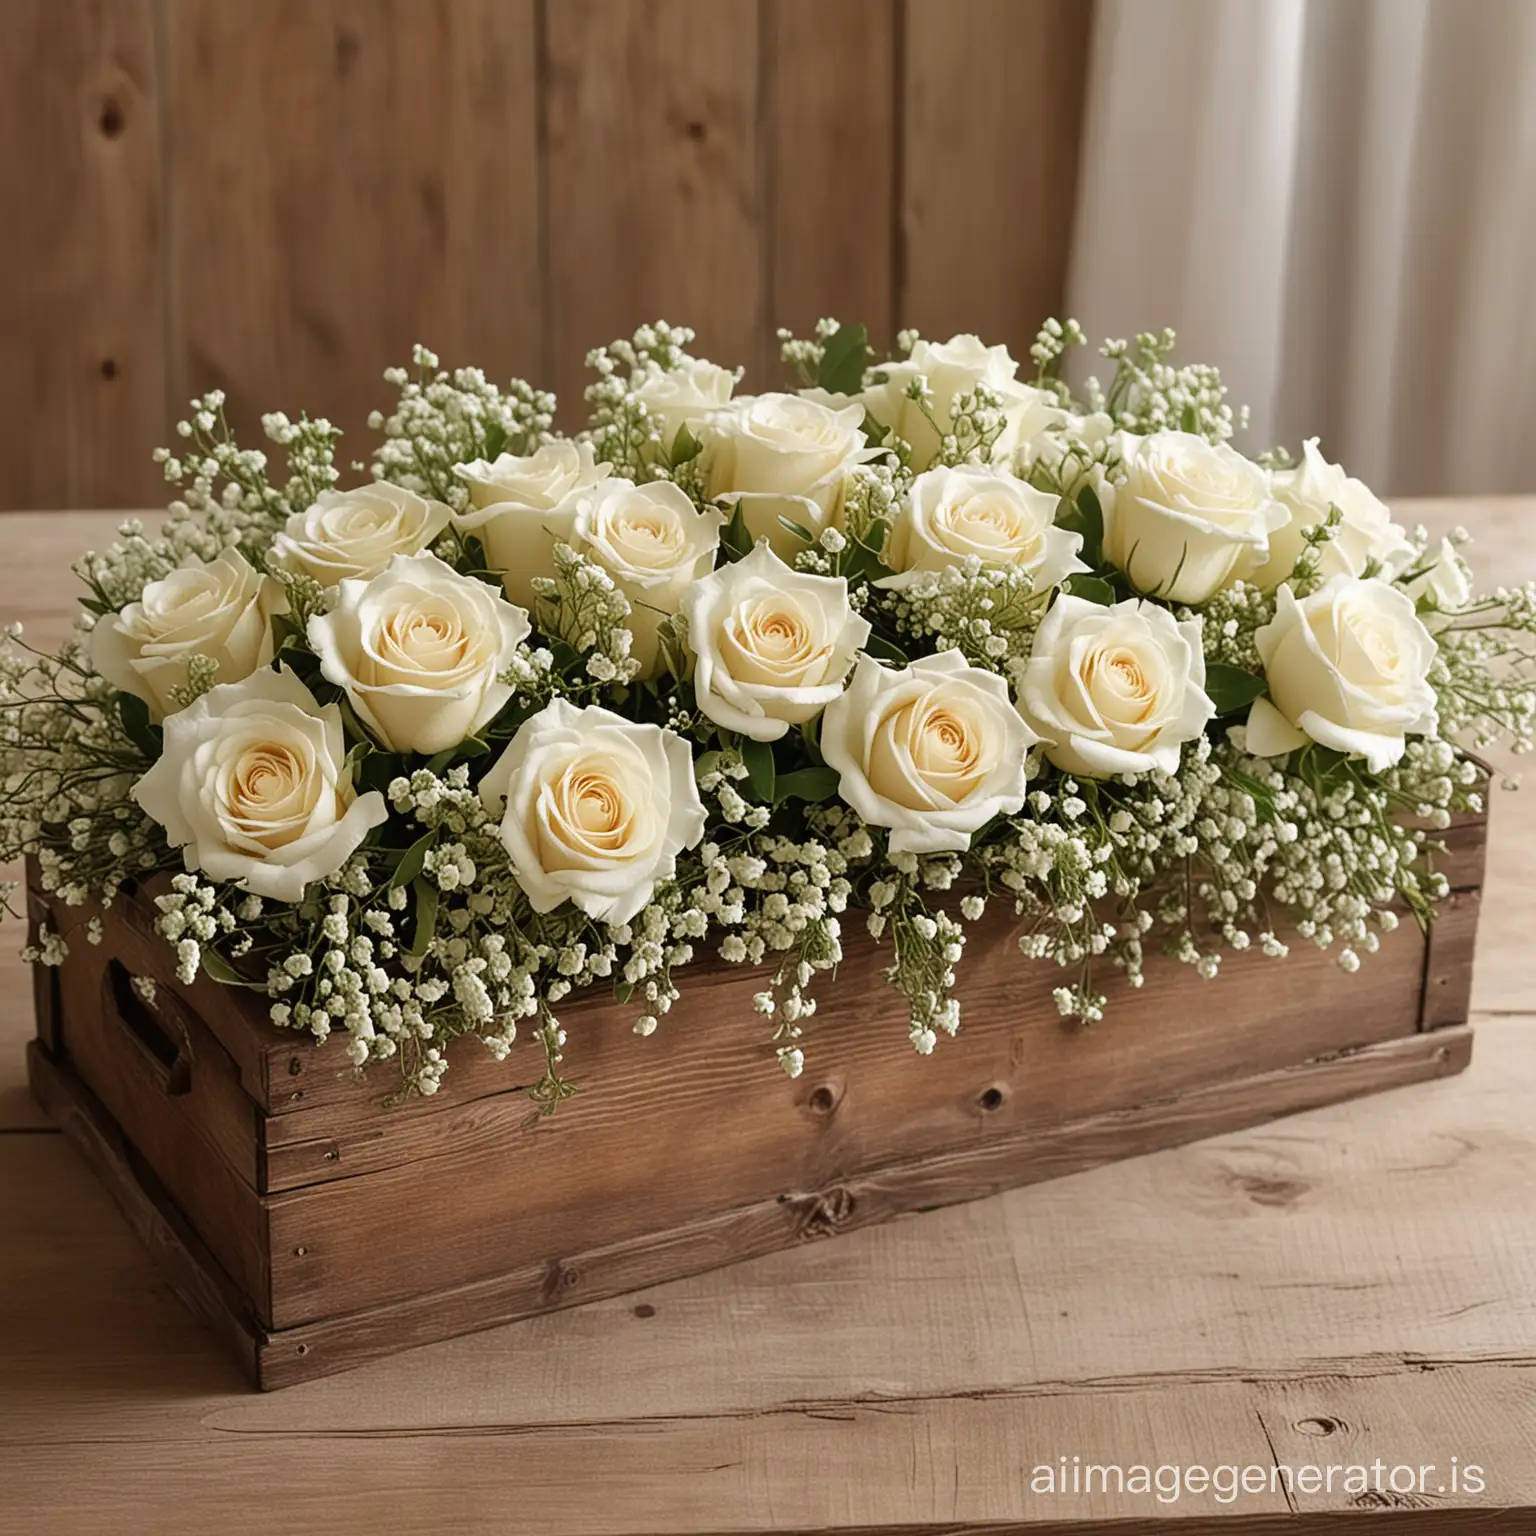 Create an image of a rustic centerpiece featuring a vintage wooden box or tray. The box should appear aged and weathered, filled with lush ivory roses and delicate sprigs of baby's breath. This arrangement should evoke a sense of rustic elegance, ideal for a vintage-themed setting. The overall composition should highlight the contrast between the rough, textured wood and the soft, delicate blooms, capturing a warm and inviting atmosphere.